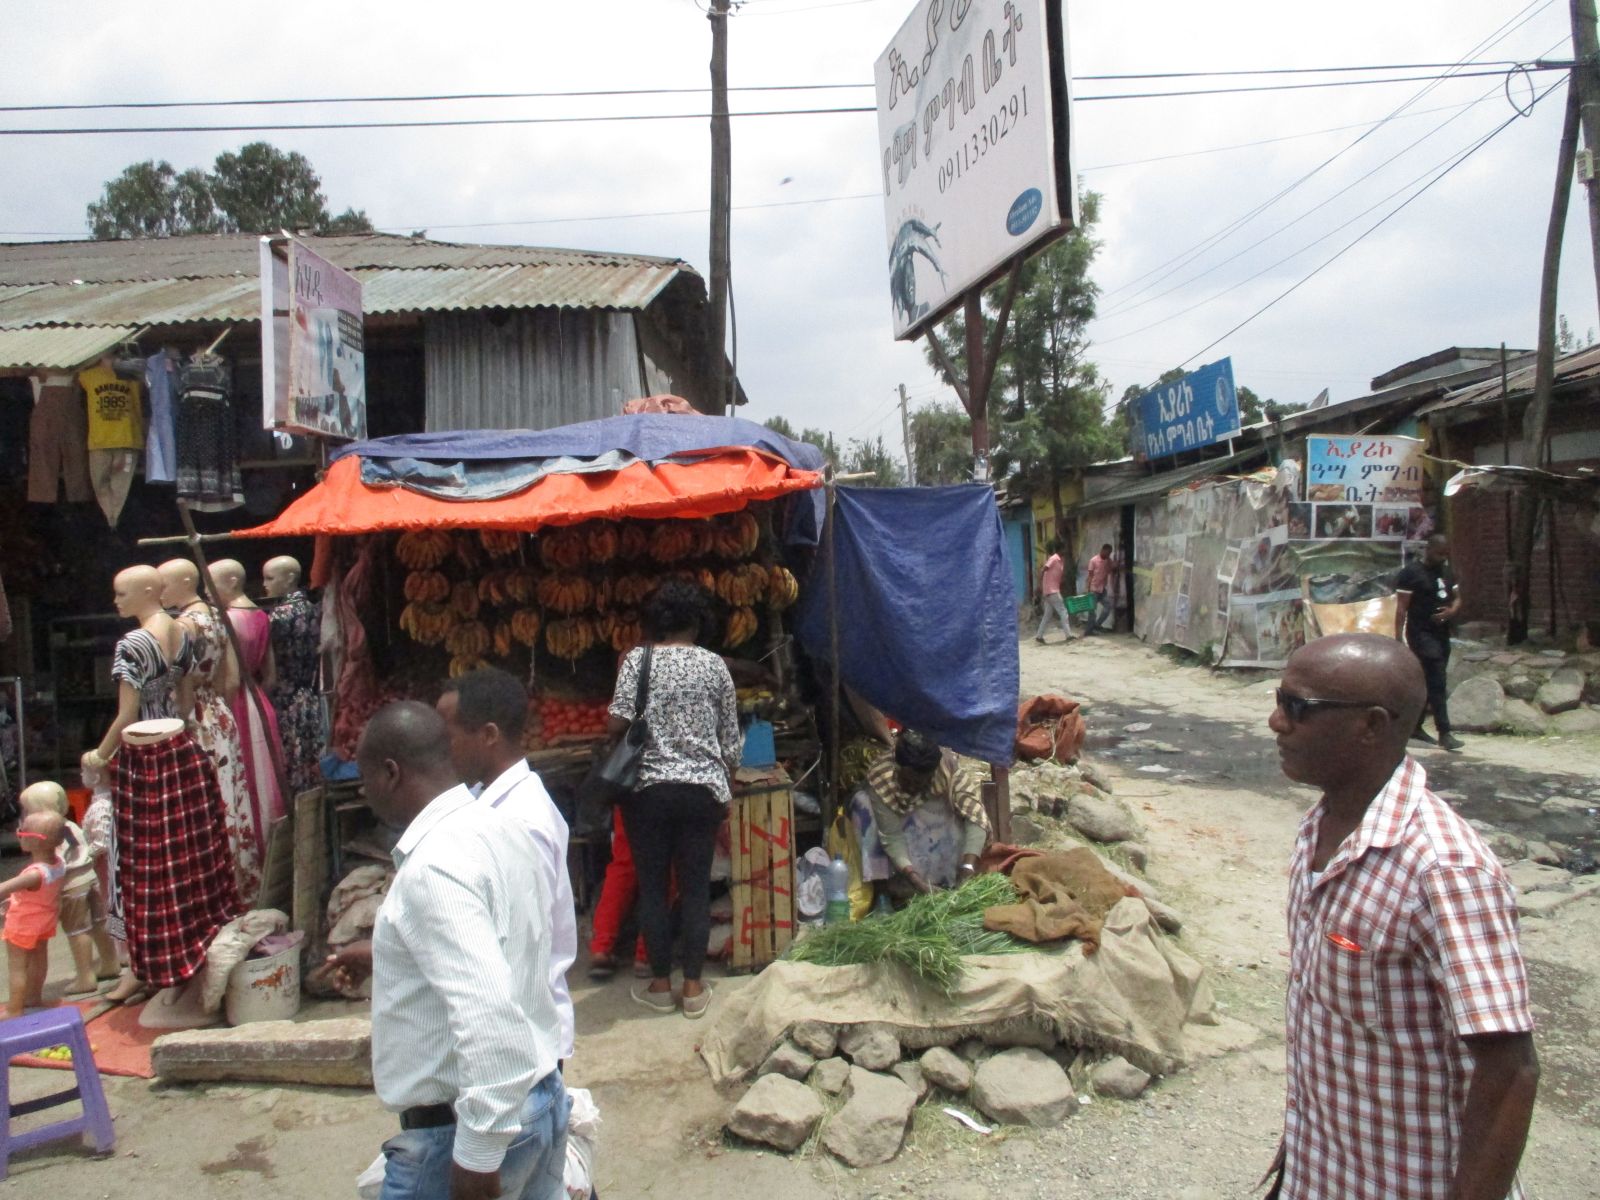 Informal retail business in Addis Ababa: To make taxes acceptable, governments must provide good infrastructure and services.